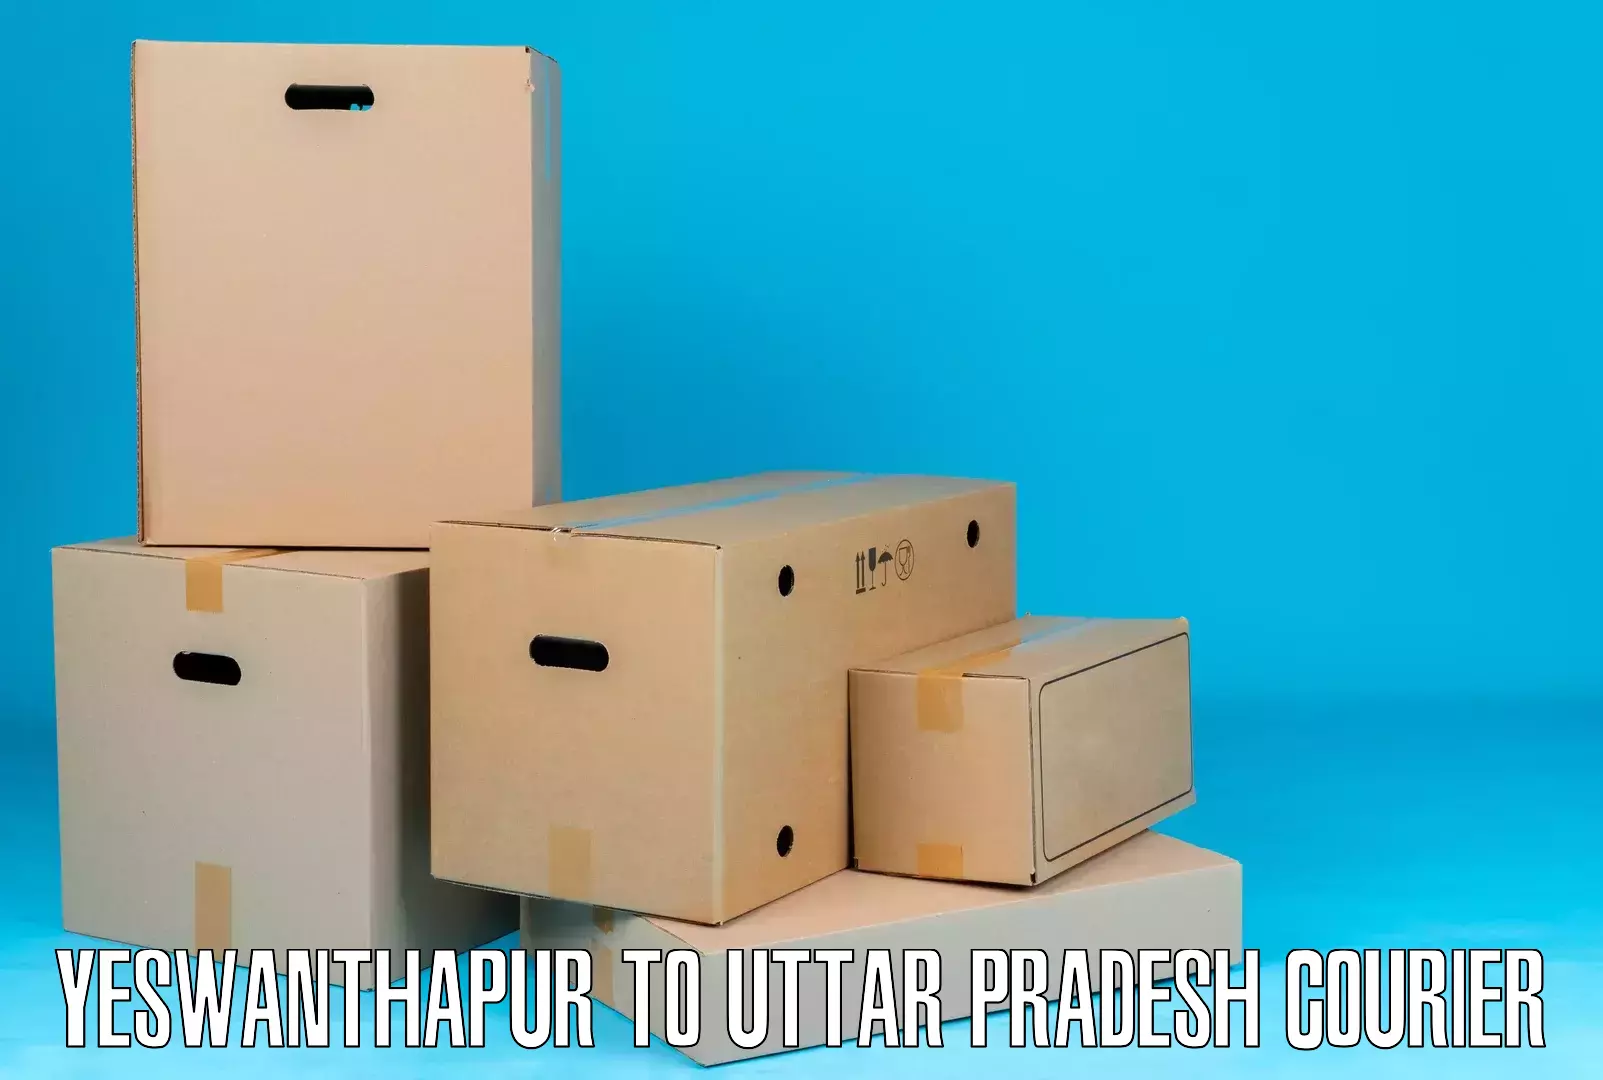 Easy access courier services Yeswanthapur to Sahatwar